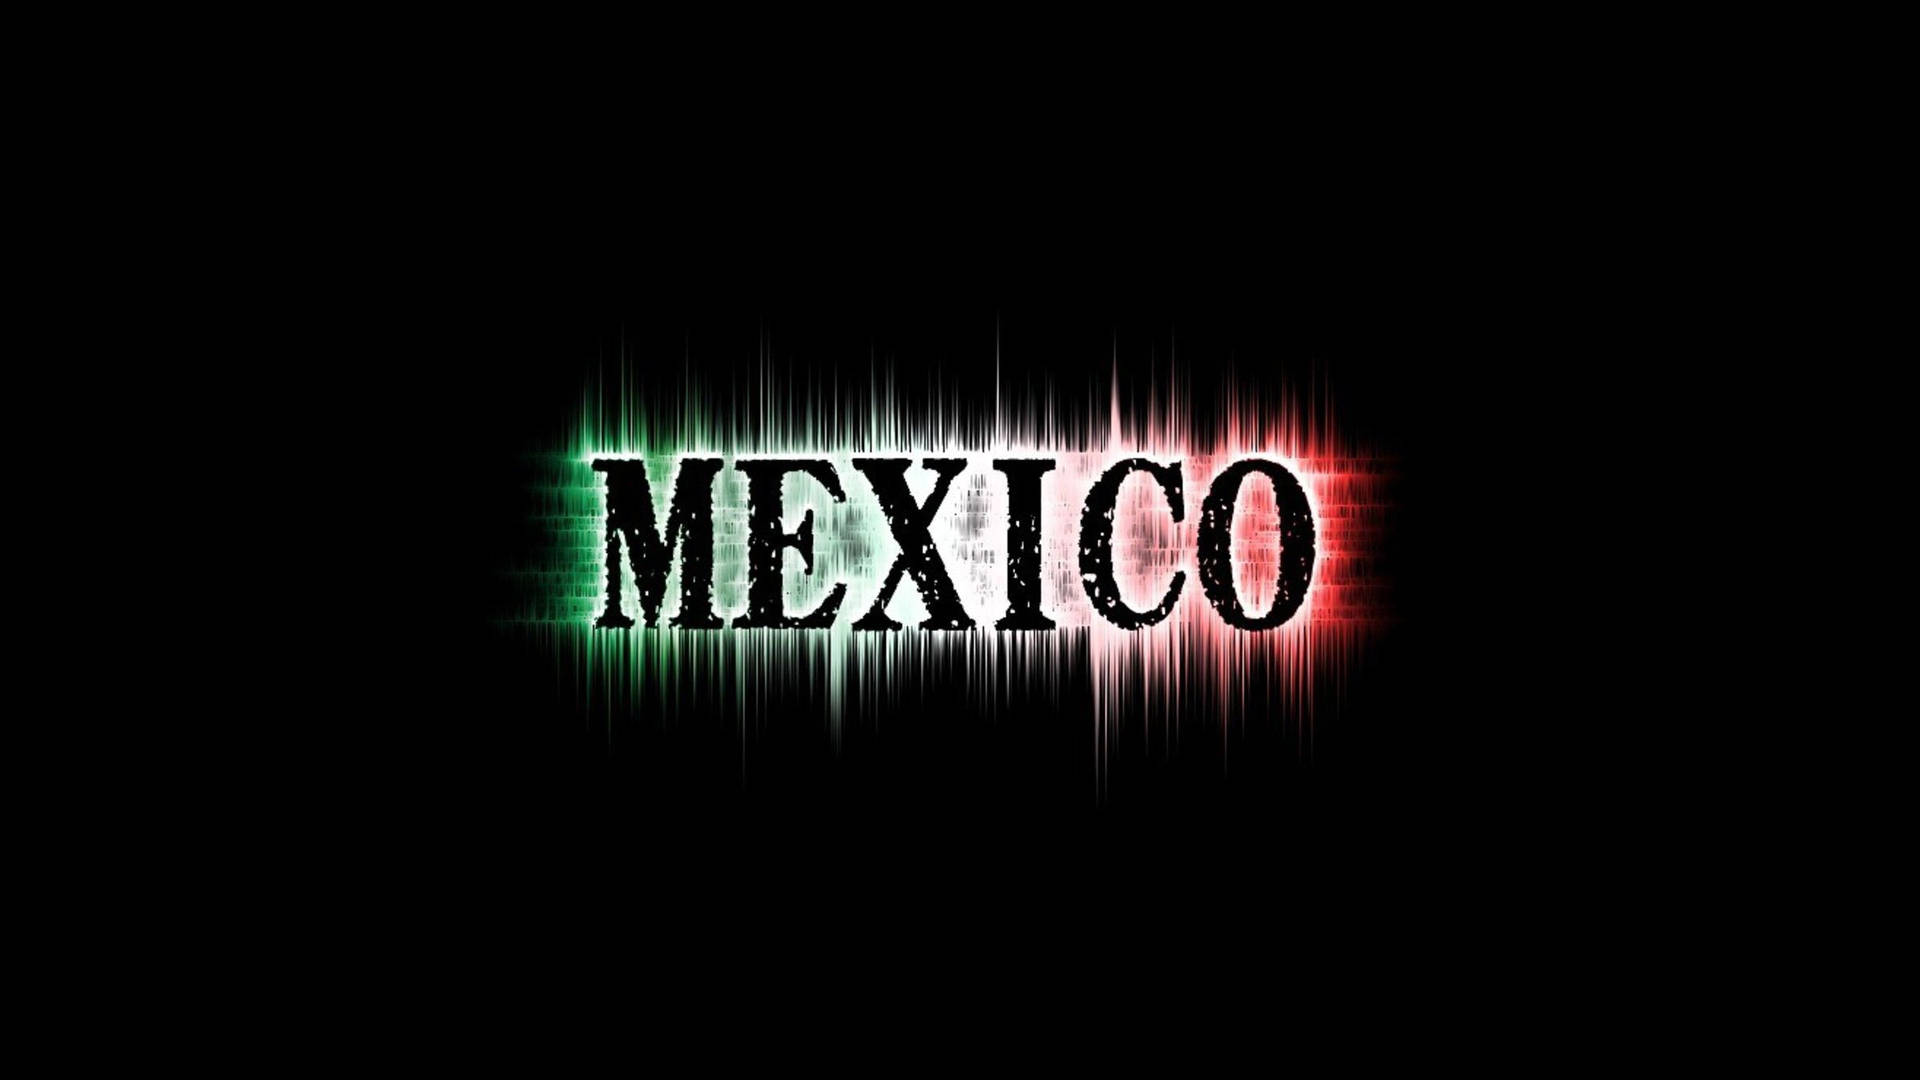 Download Mexican Stylized Poster Wallpaper